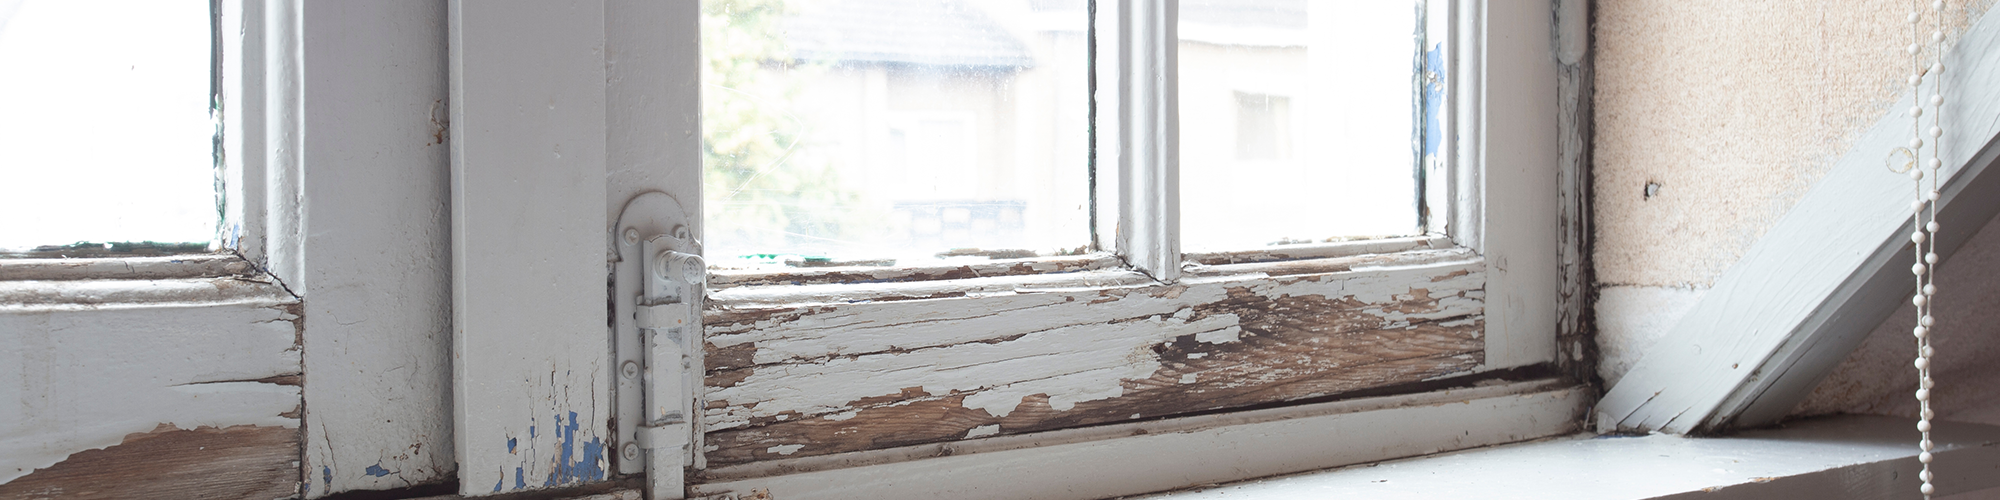 Chipped paint and cracked wood on window. SAM Conveyancing's guide on handling a rotten window frame